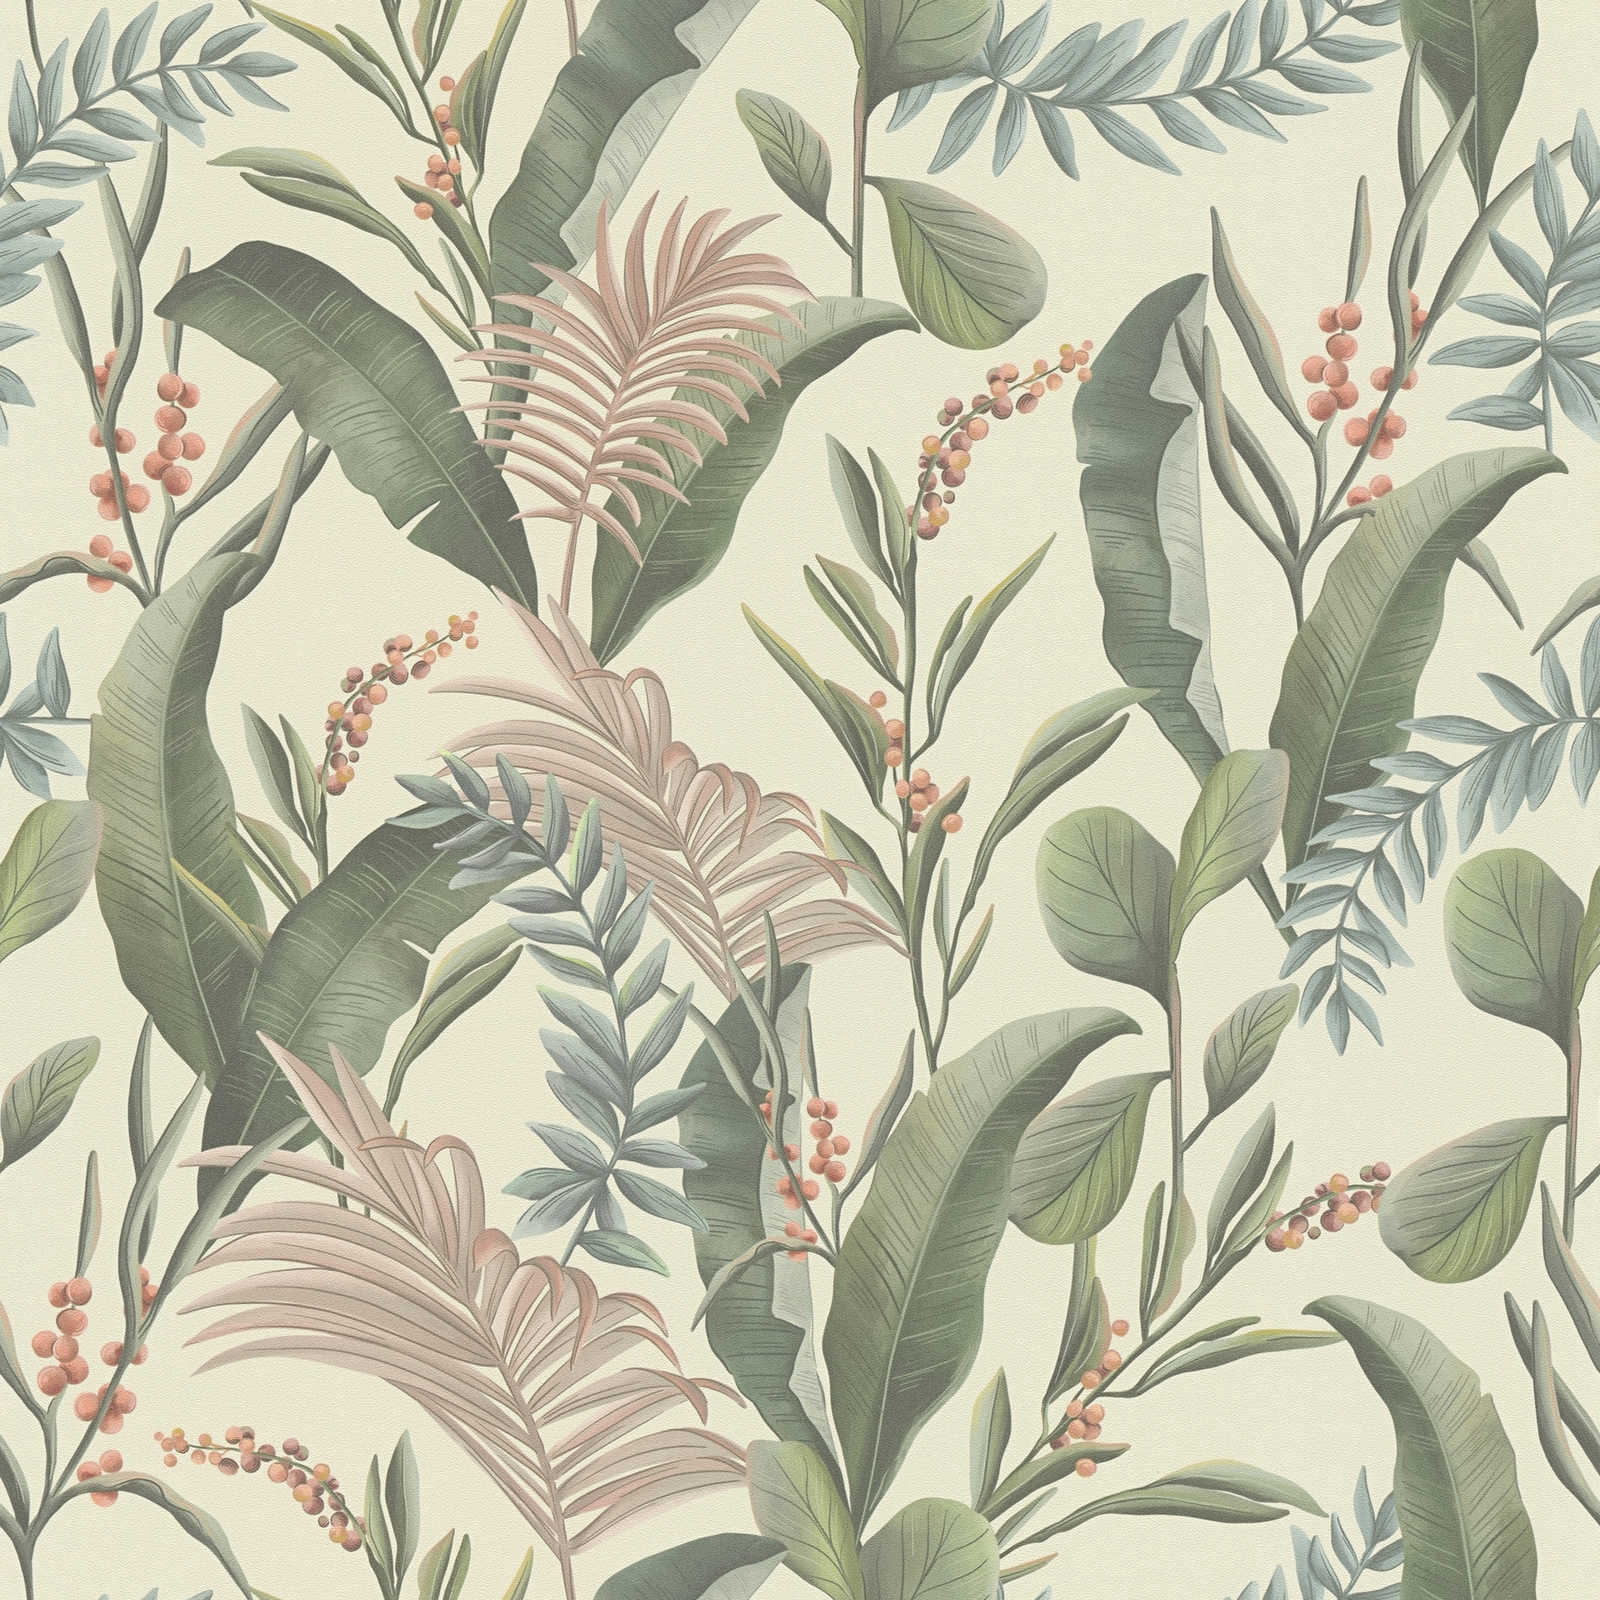 Floral wallpaper with leaves in jungle style textured matt - cream, green, beige
